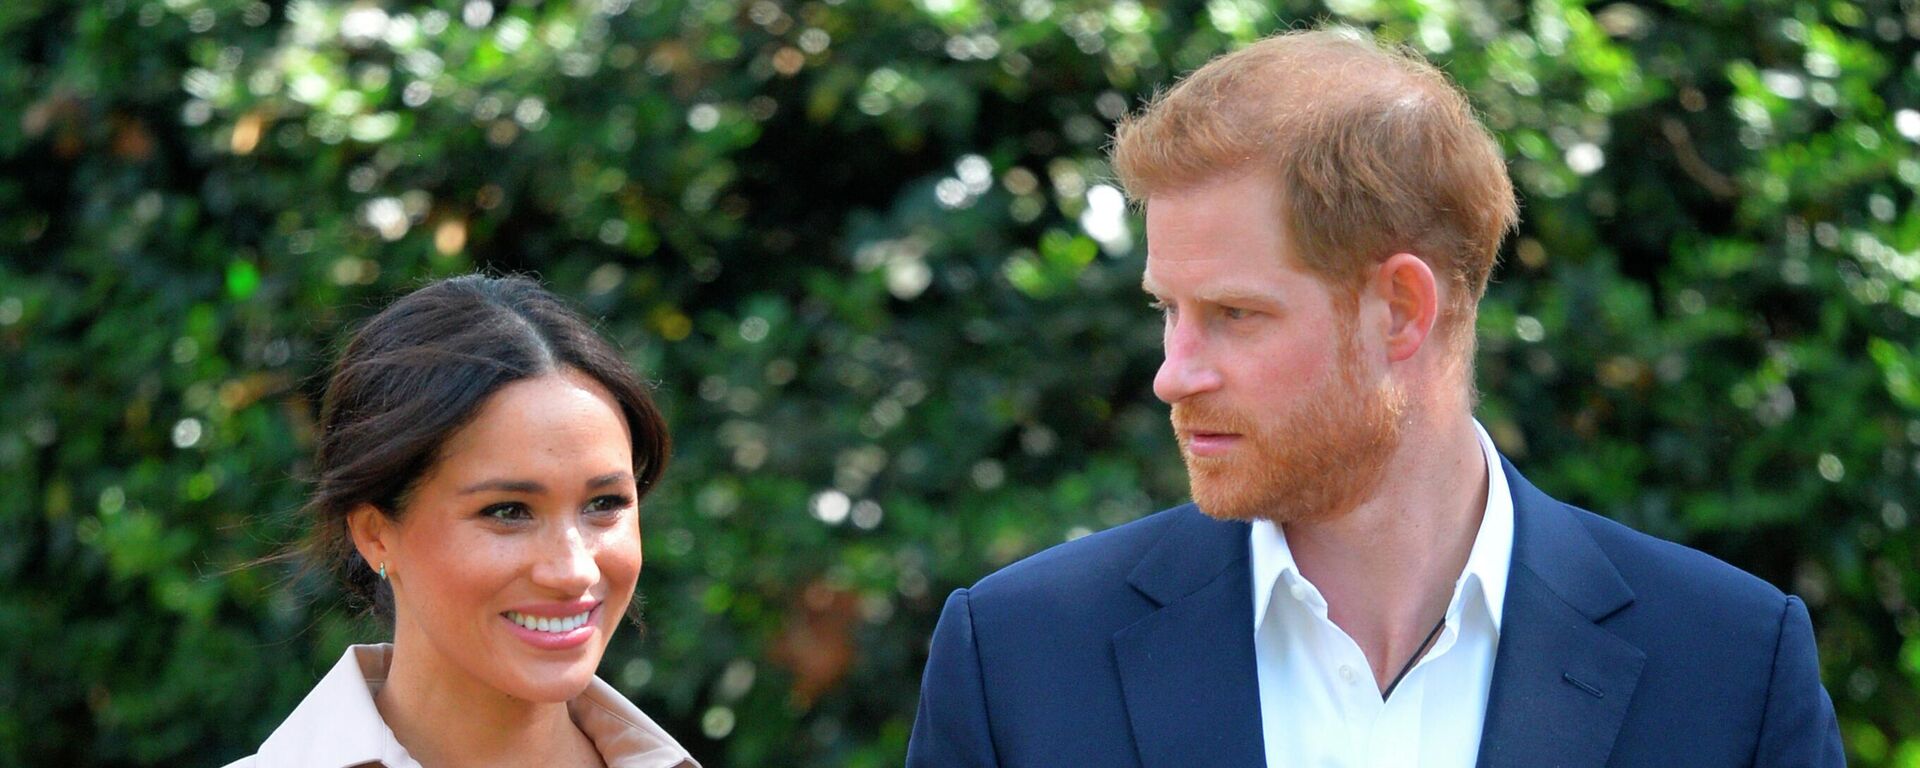 FILE - In this Oct. 2, 2019, file photo, Britain's Prince Harry and Meghan Markle appear at the Creative Industries and Business Reception at the British High Commissioner's residence in Johannesburg.  - Sputnik International, 1920, 09.11.2022